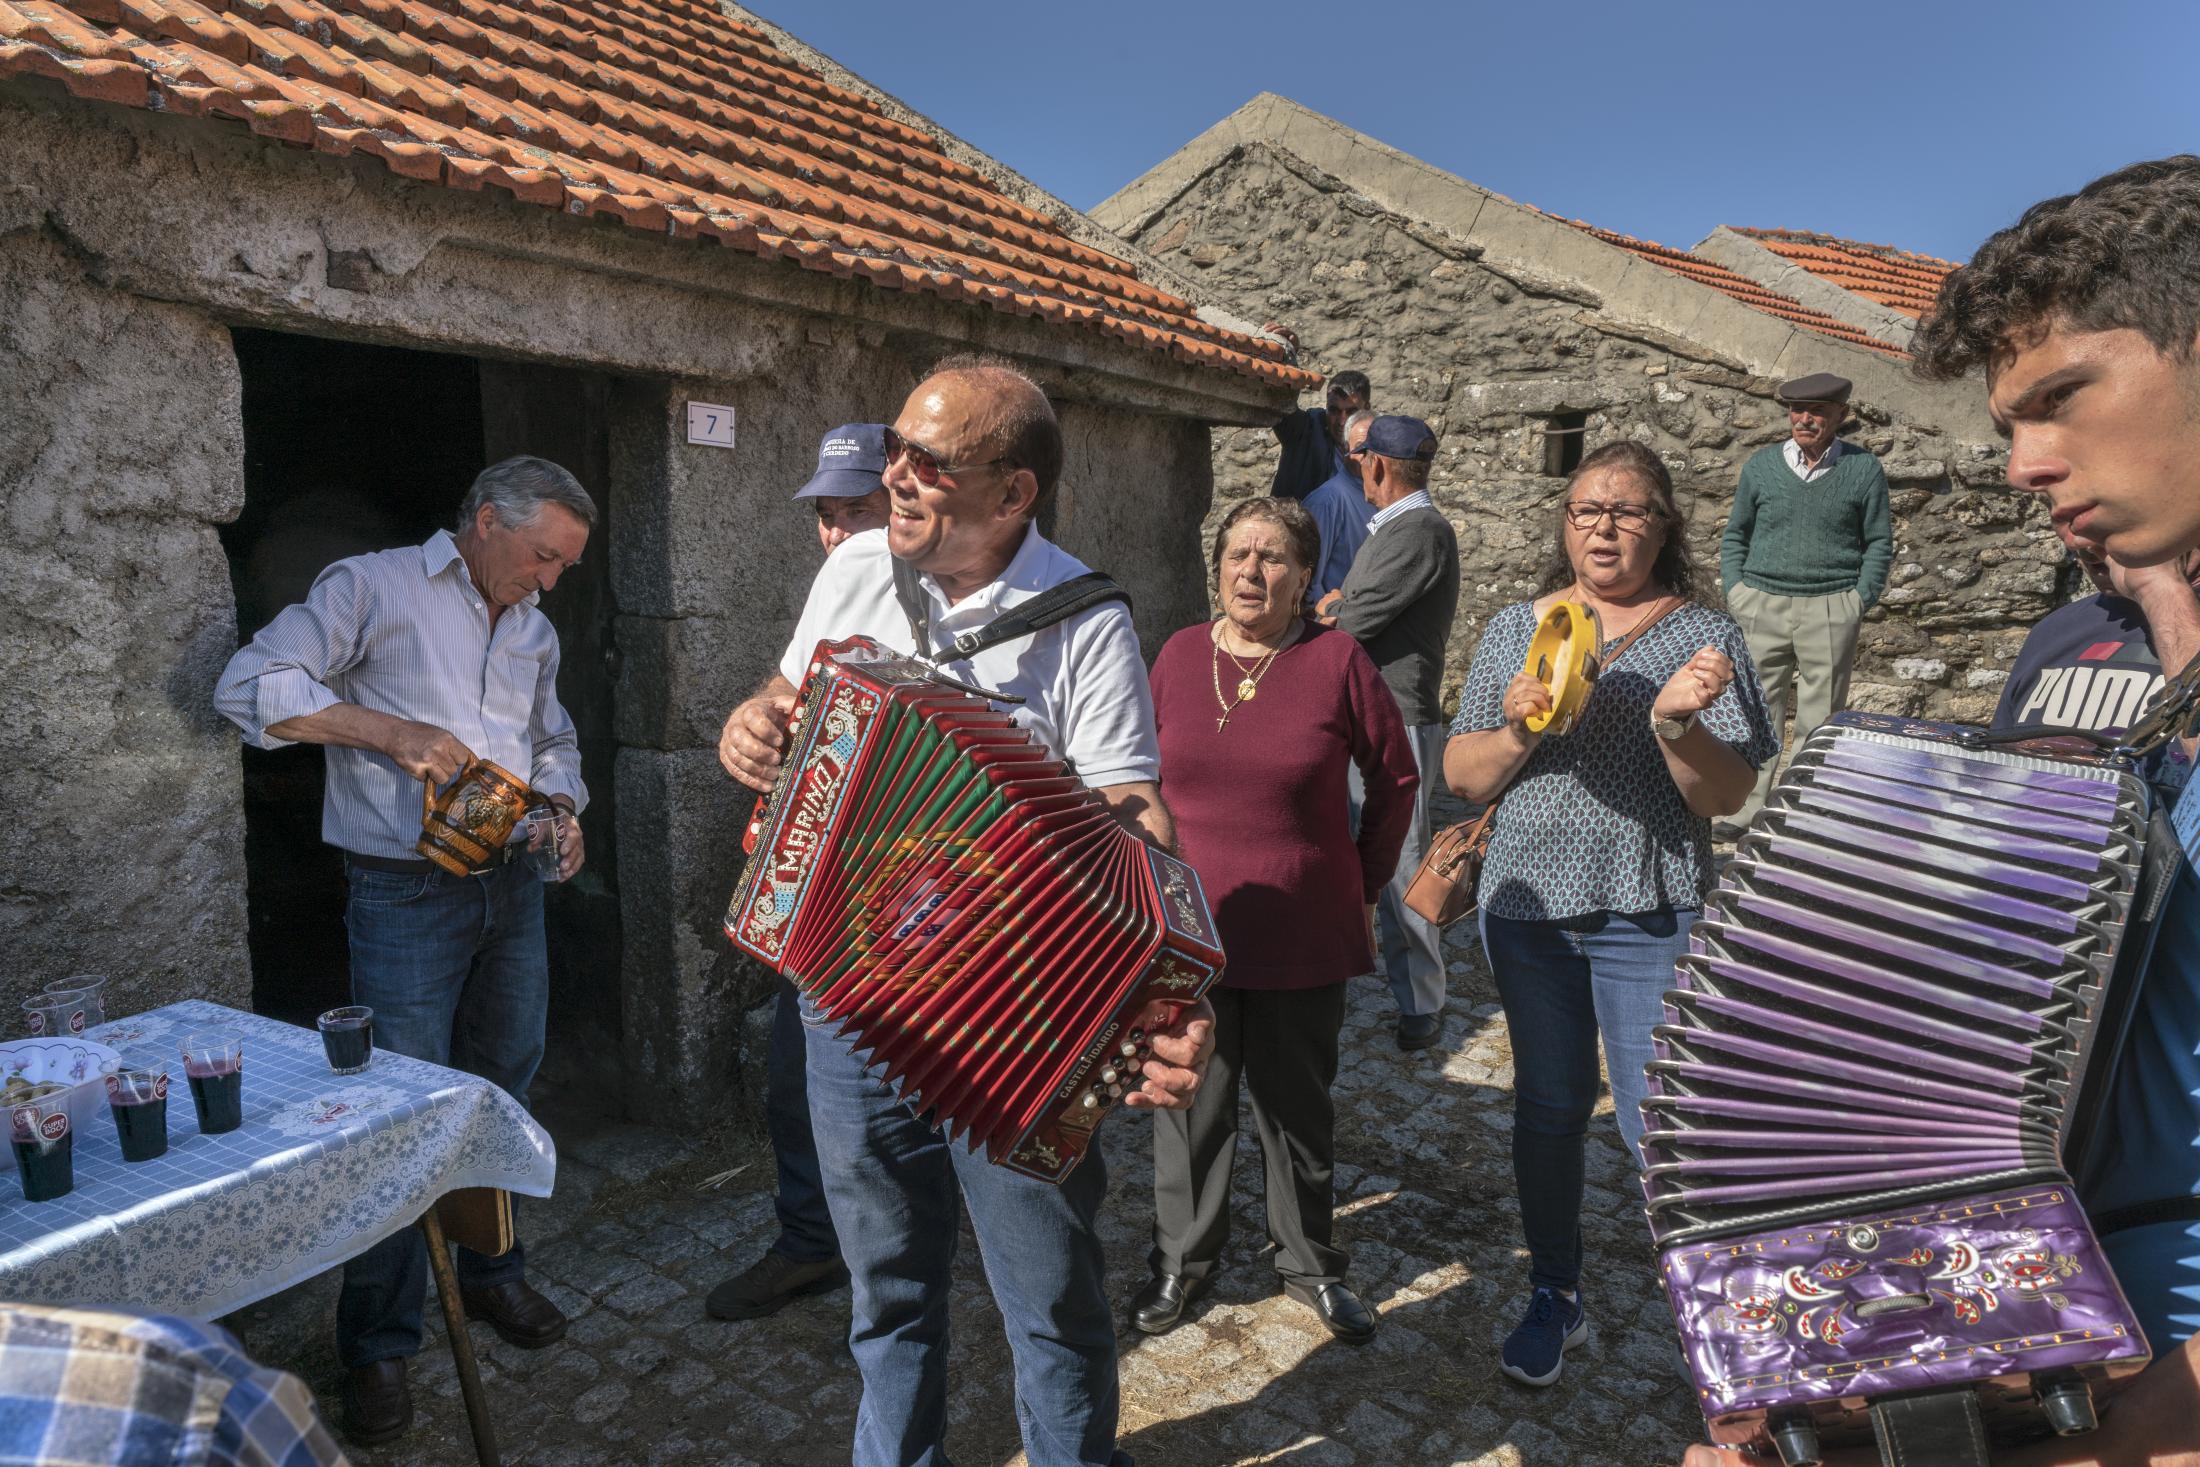 Barroso: An Ancient Farming Culture in Northern Portugal Becomes a World Heritage - Residents of Vilarinho Seco, sing and drink after a...